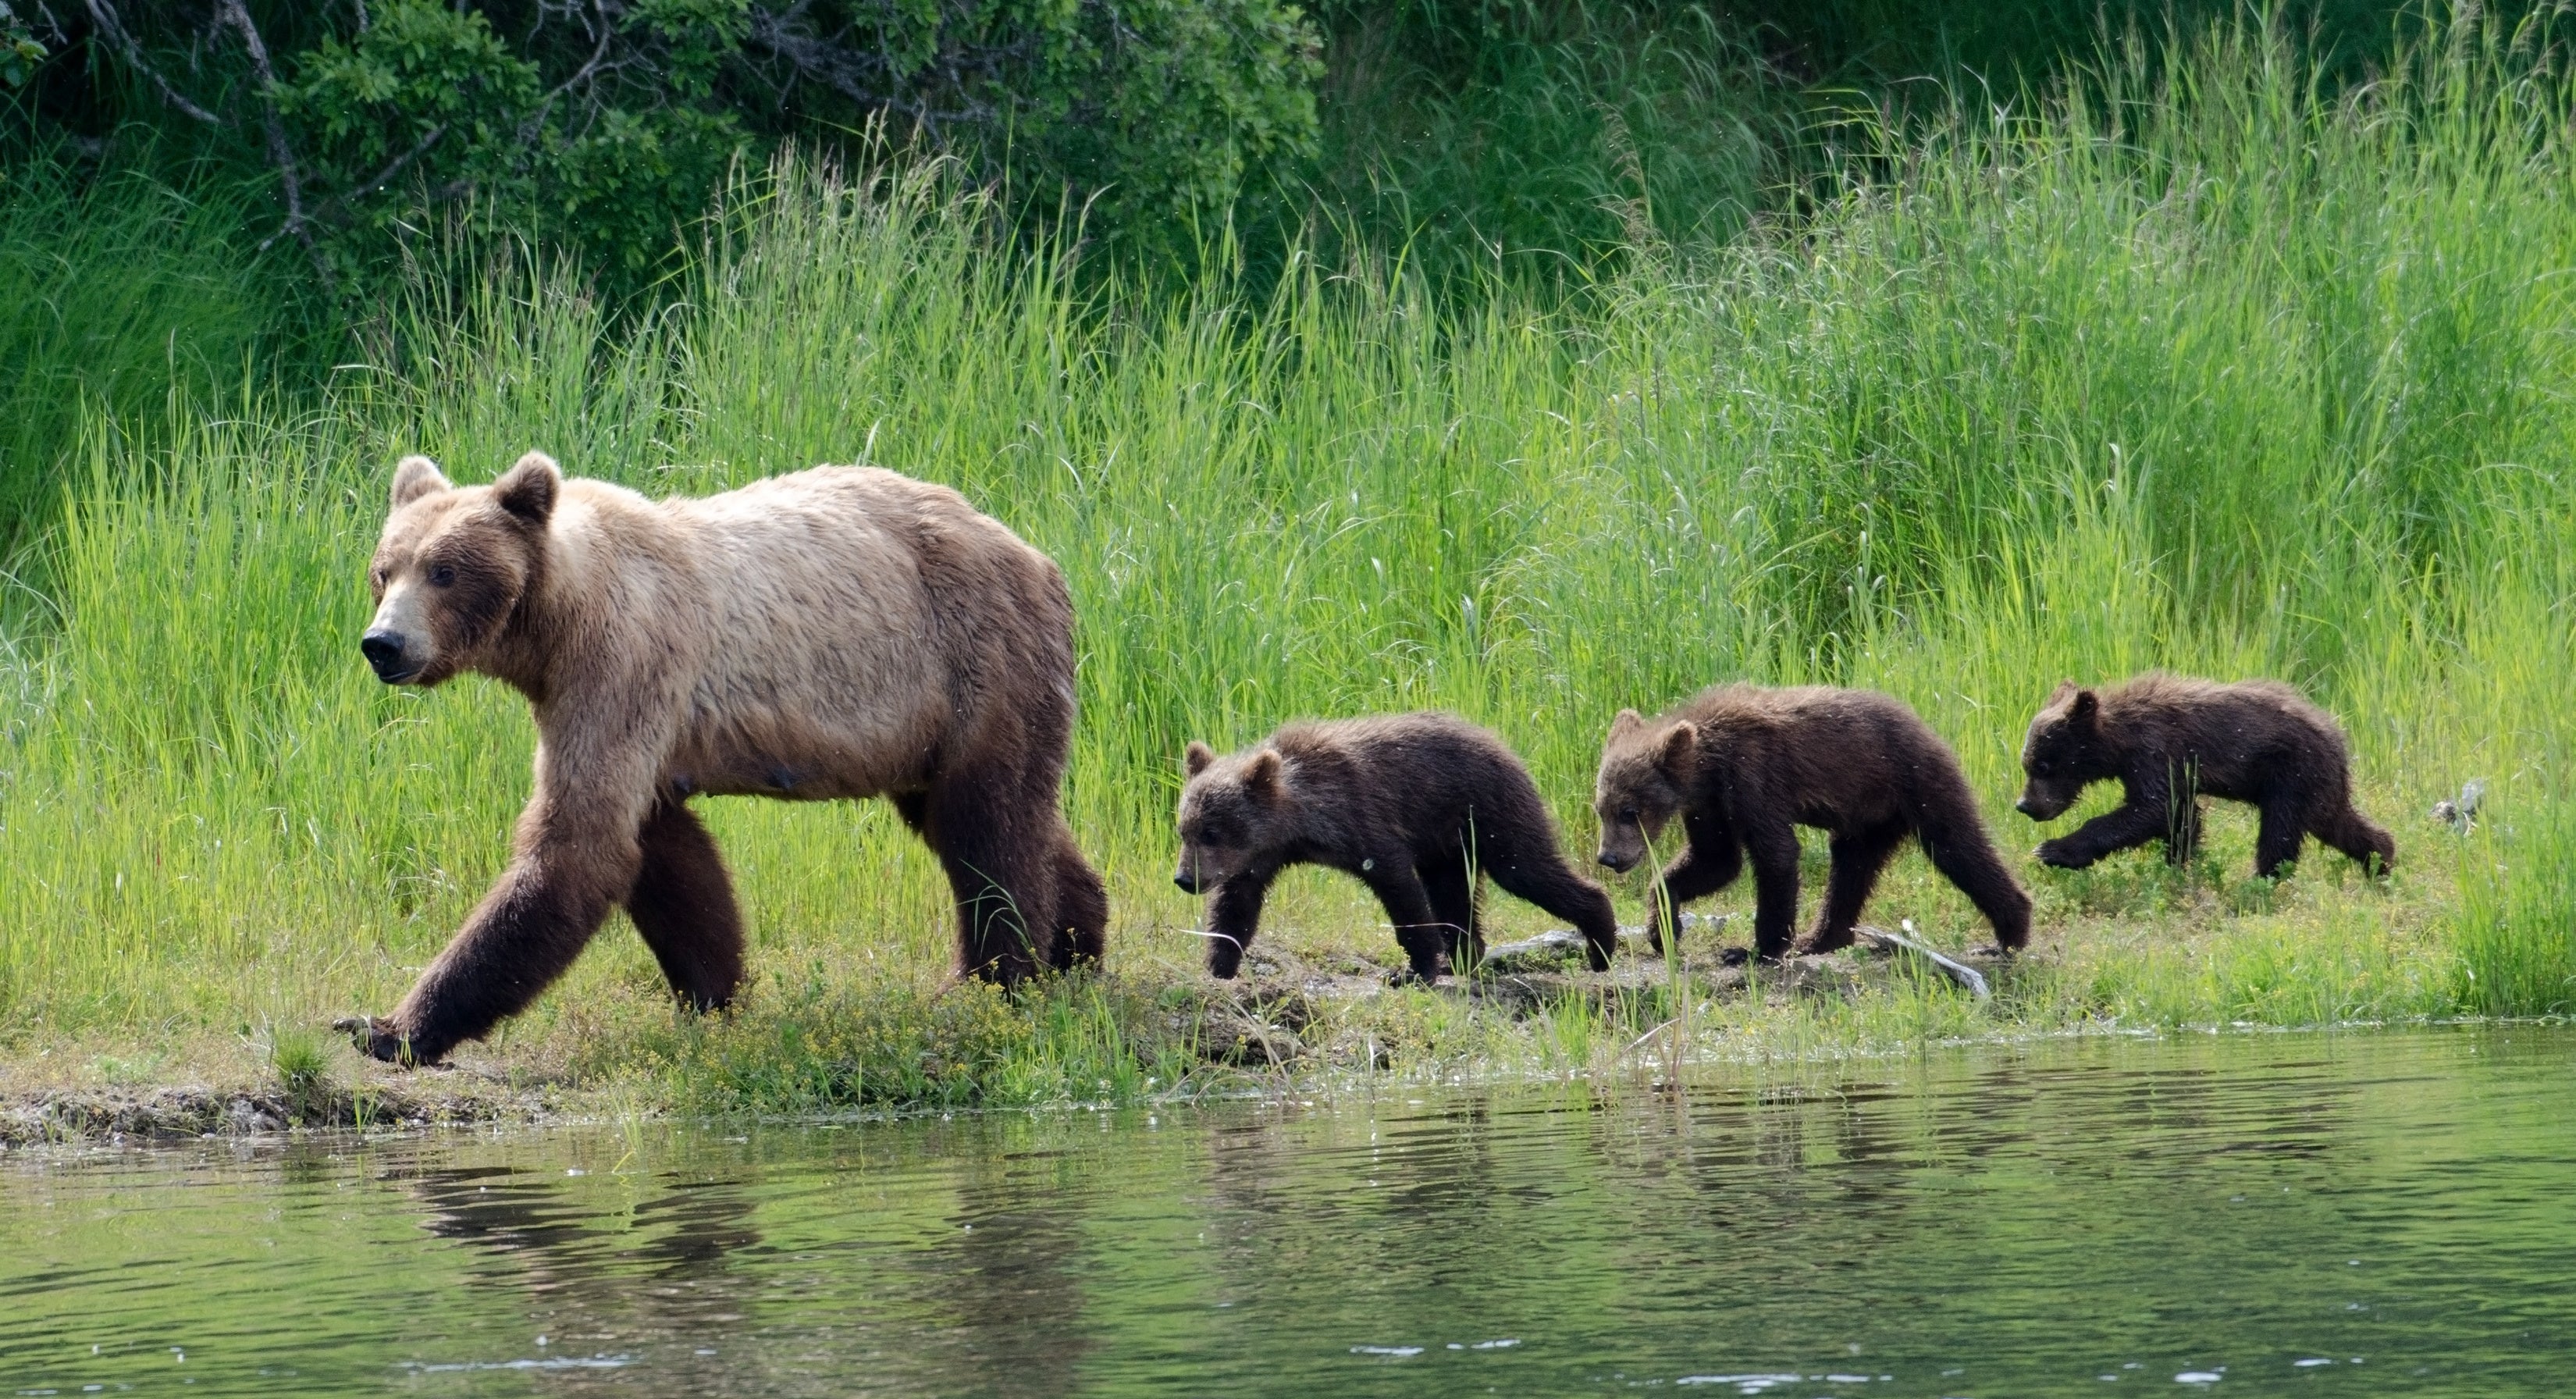 Mother bear and her three baby cubs